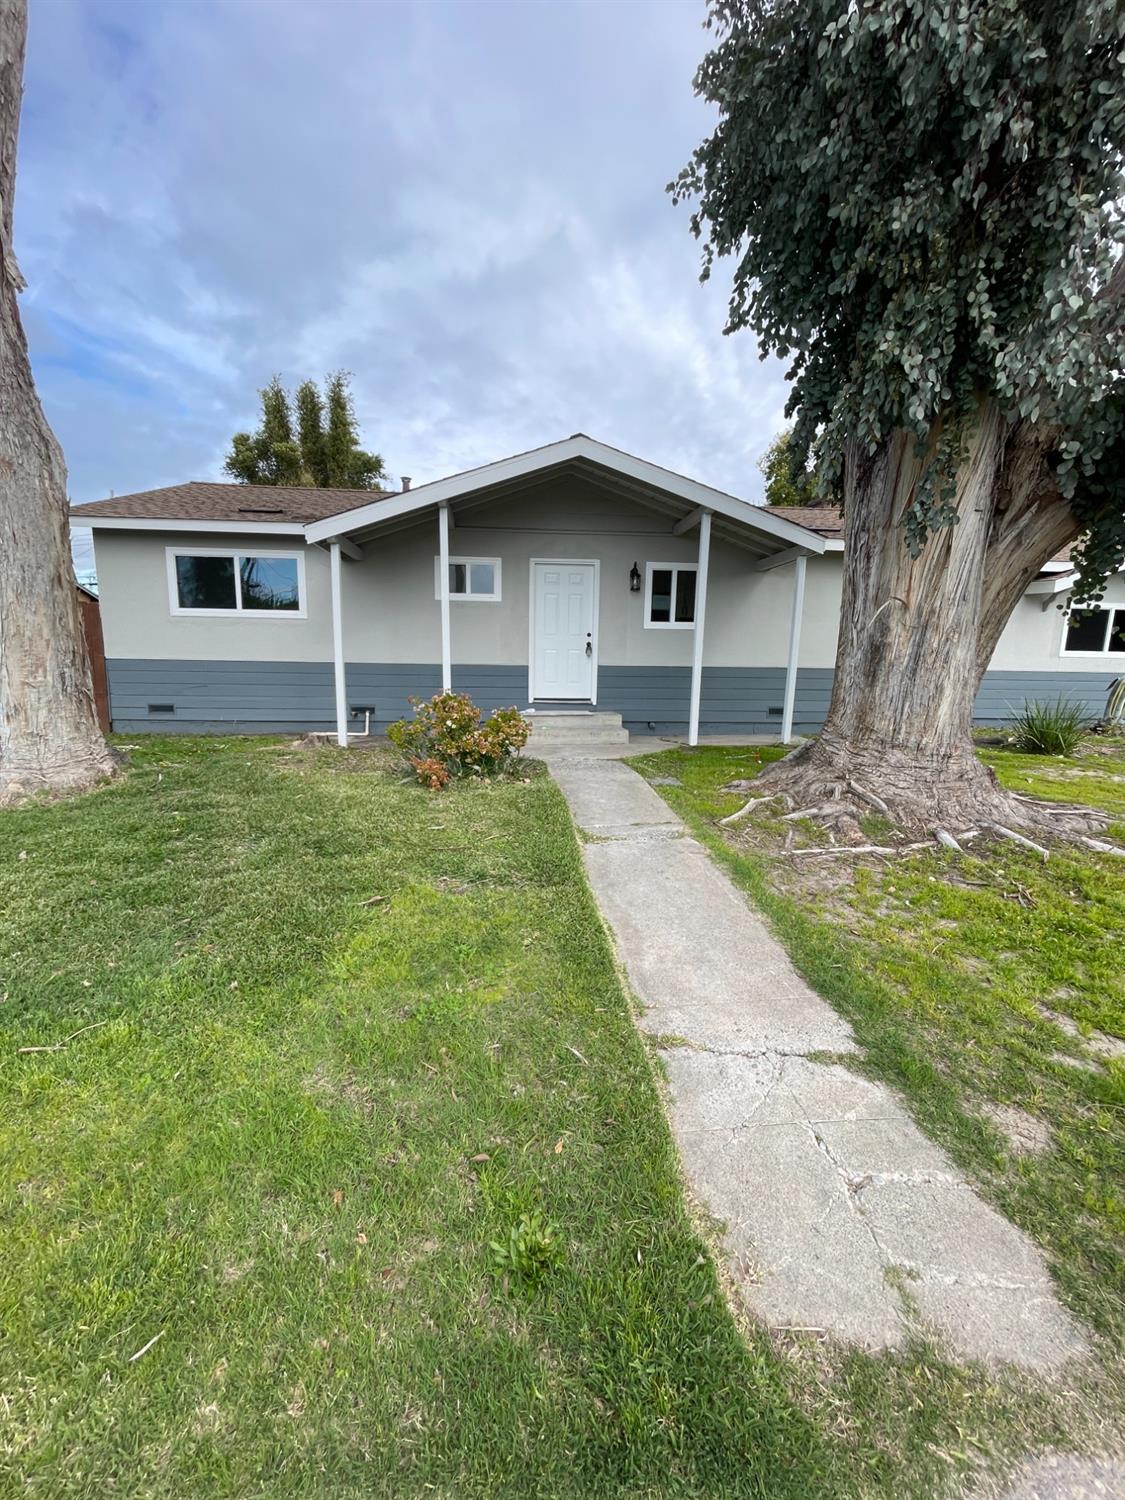 Delightful Updated 3 Bedroom /2 Bath , Ready for New family to call it home! Beautifully Redone with